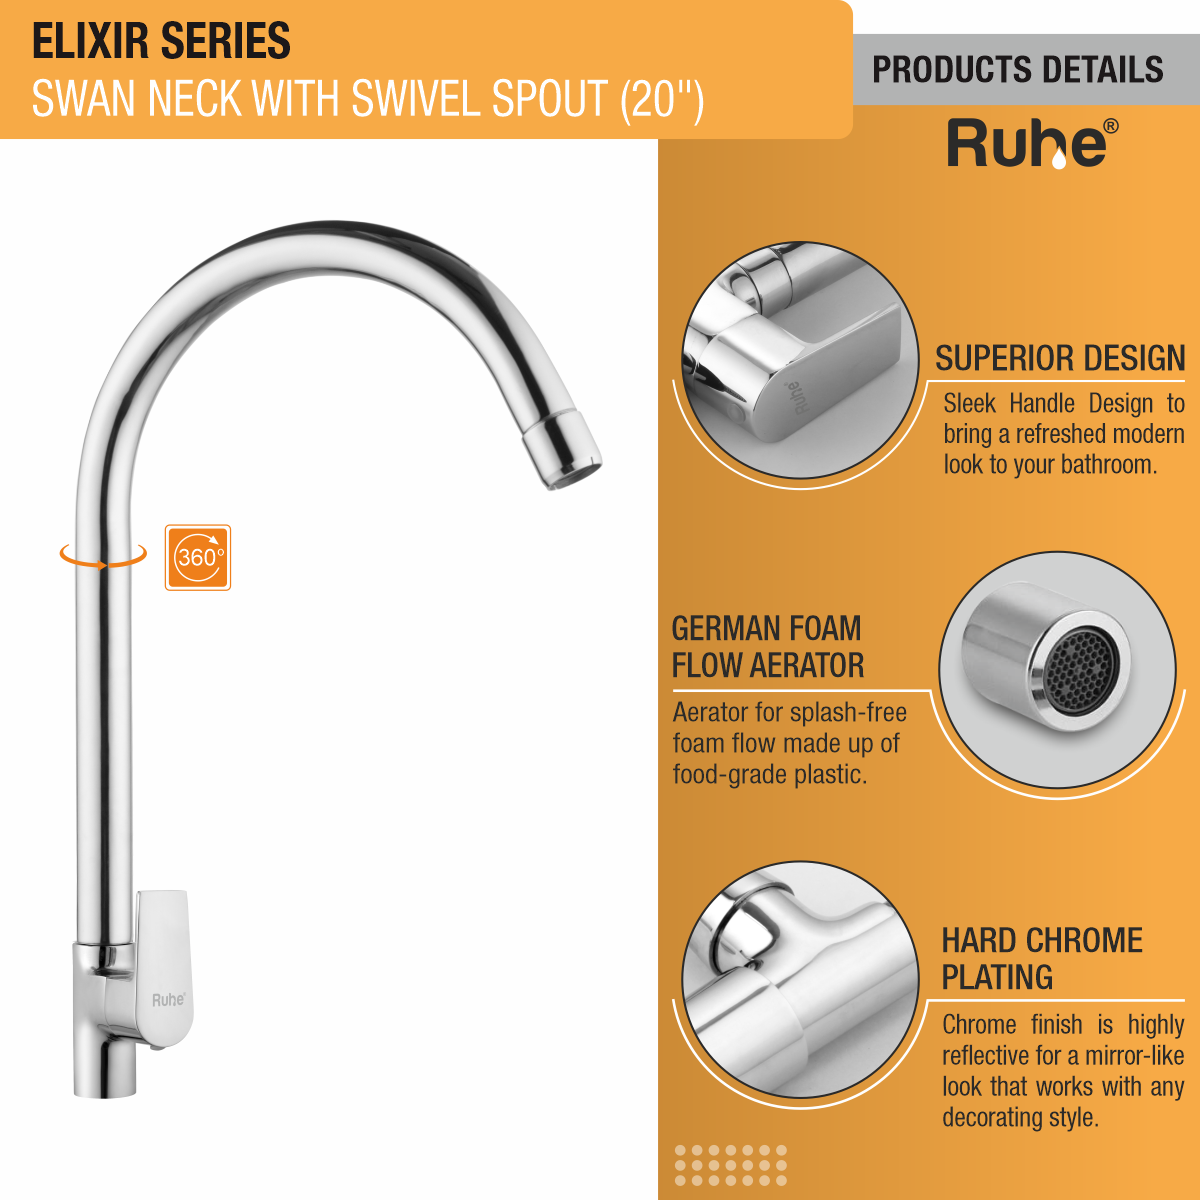 Elixir Swan Neck with Large (20 inches) Round Swivel Spout Faucet product details